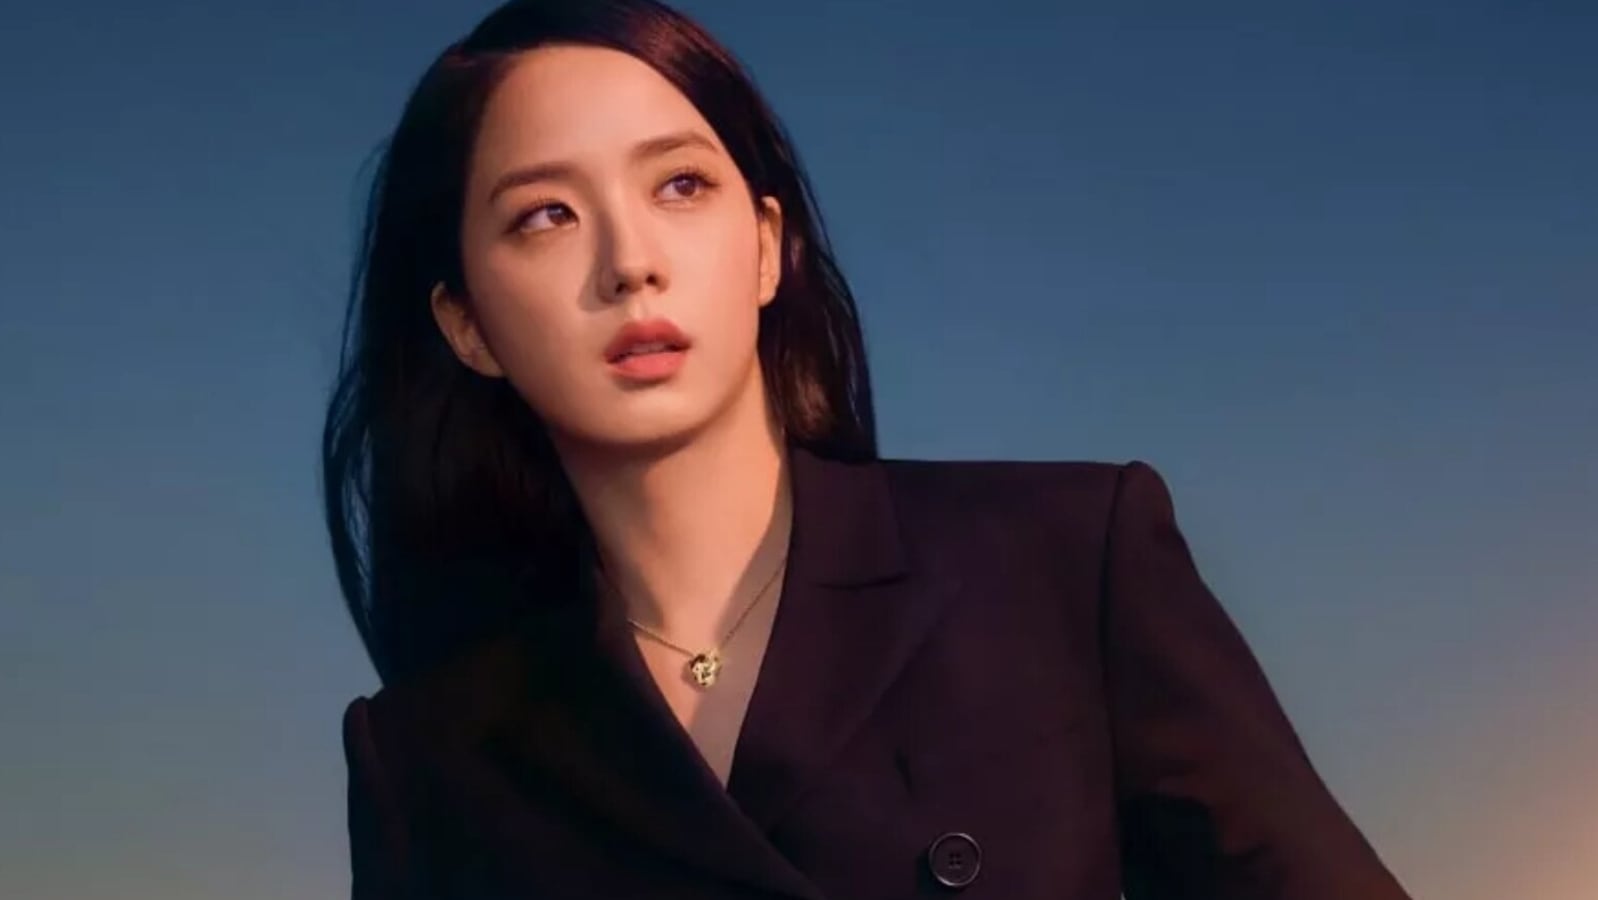 Jisoo (BLACKPINK) profile, age & facts (2023 updated)